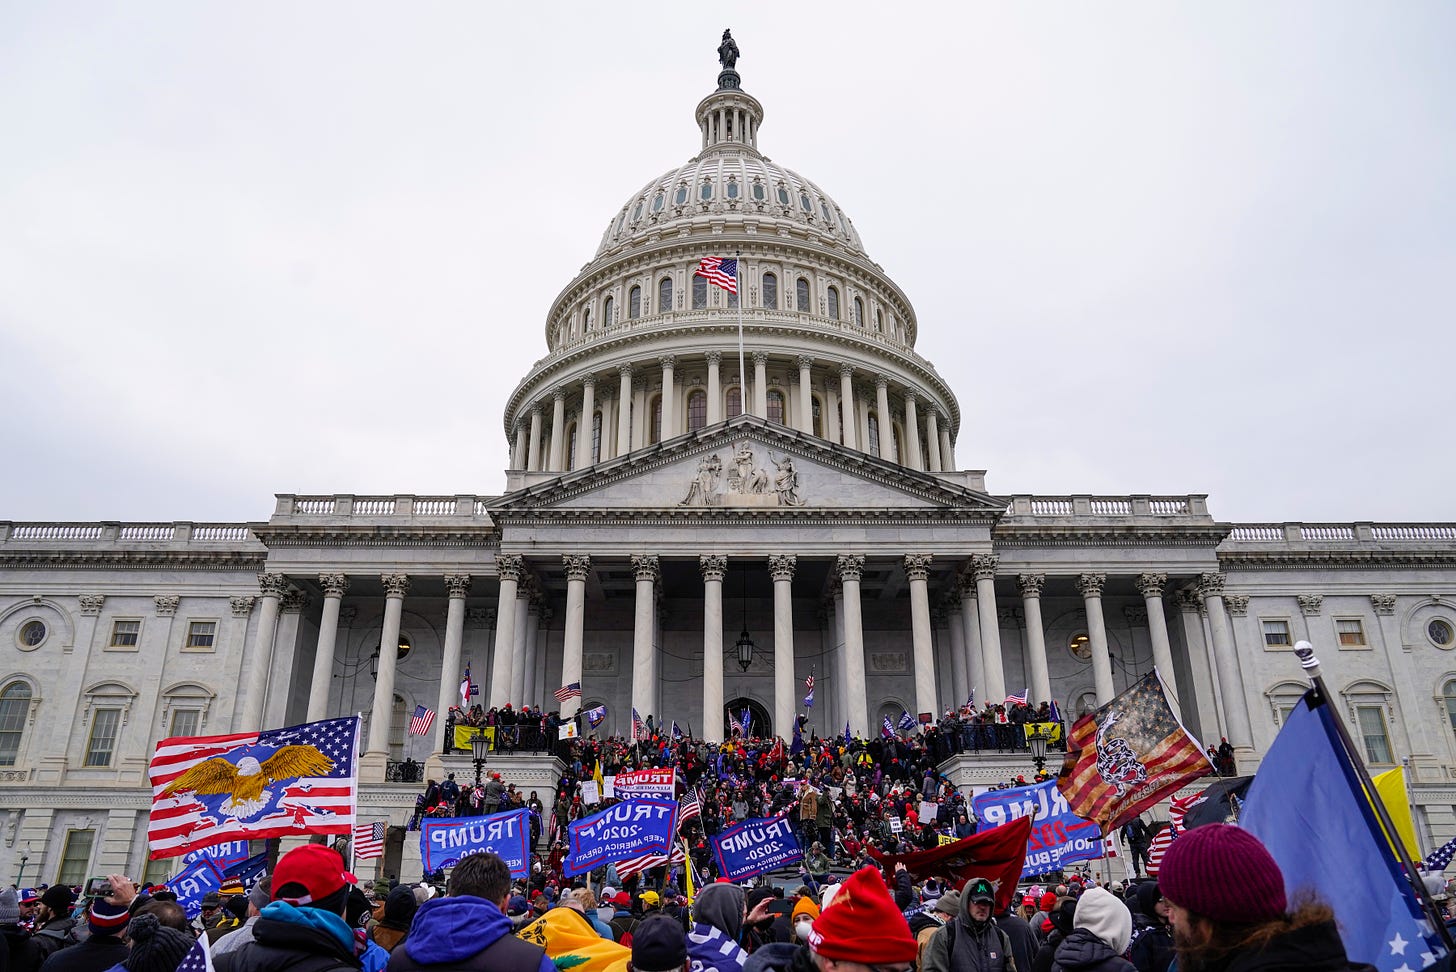 Crowds gather for the "Stop the Steal" rally on January 6, 2021 in Washington, DC. (Robert Nickelsberg / Getty Images)